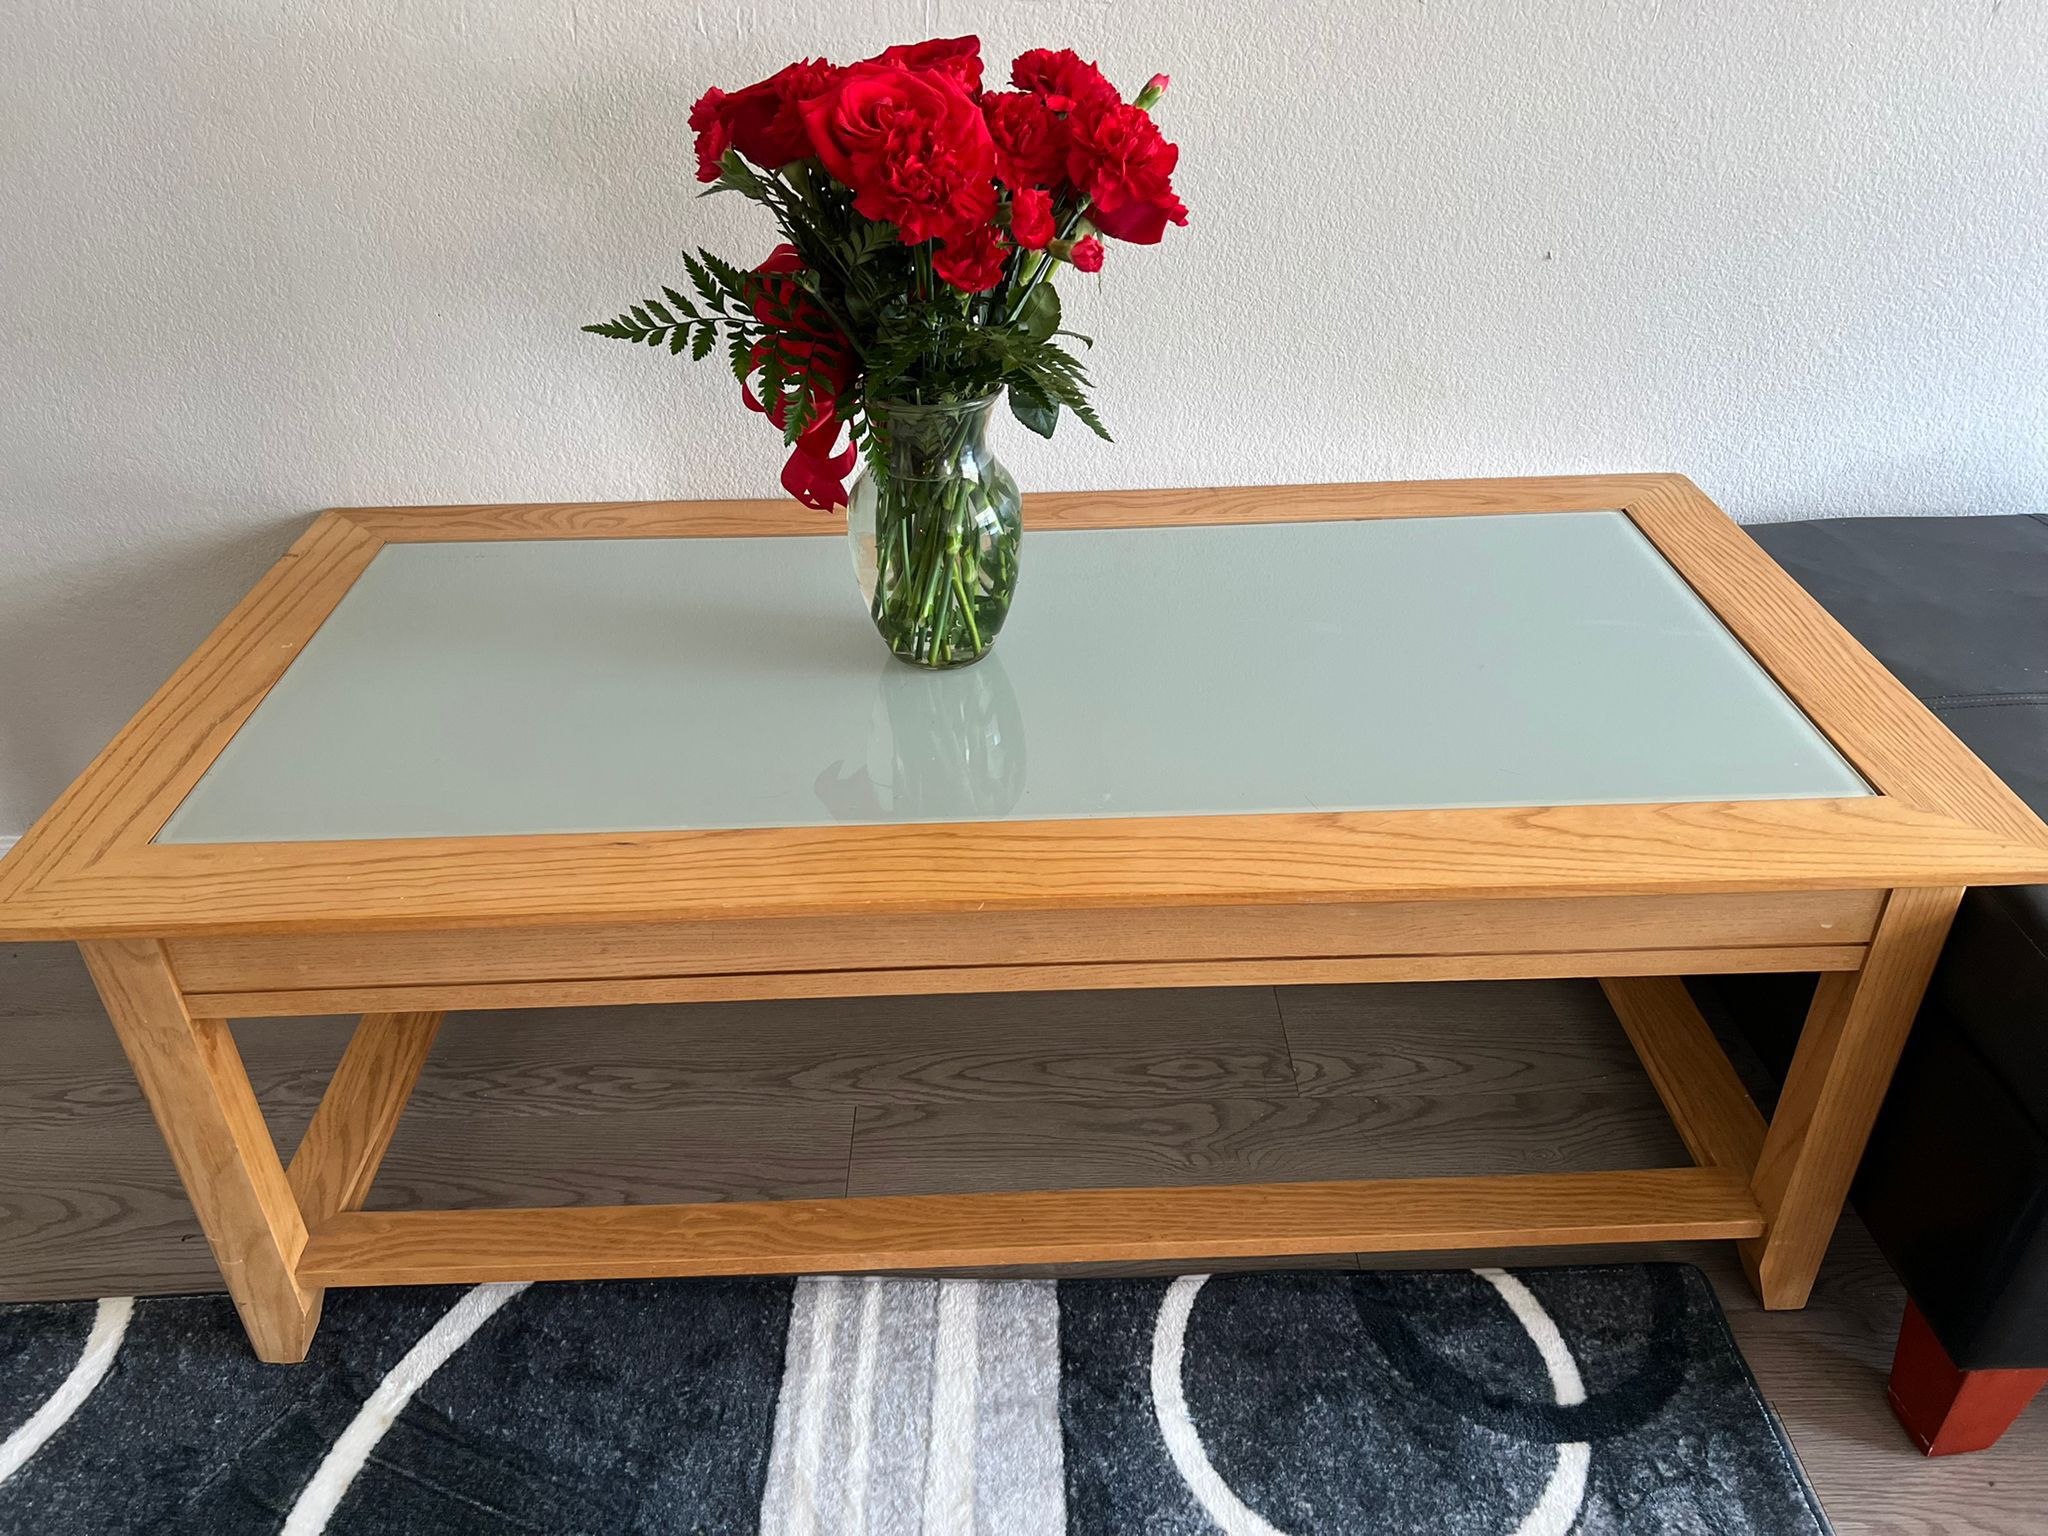 COFFEE TABLE FOR SALE!! NEED TO GO ASAP